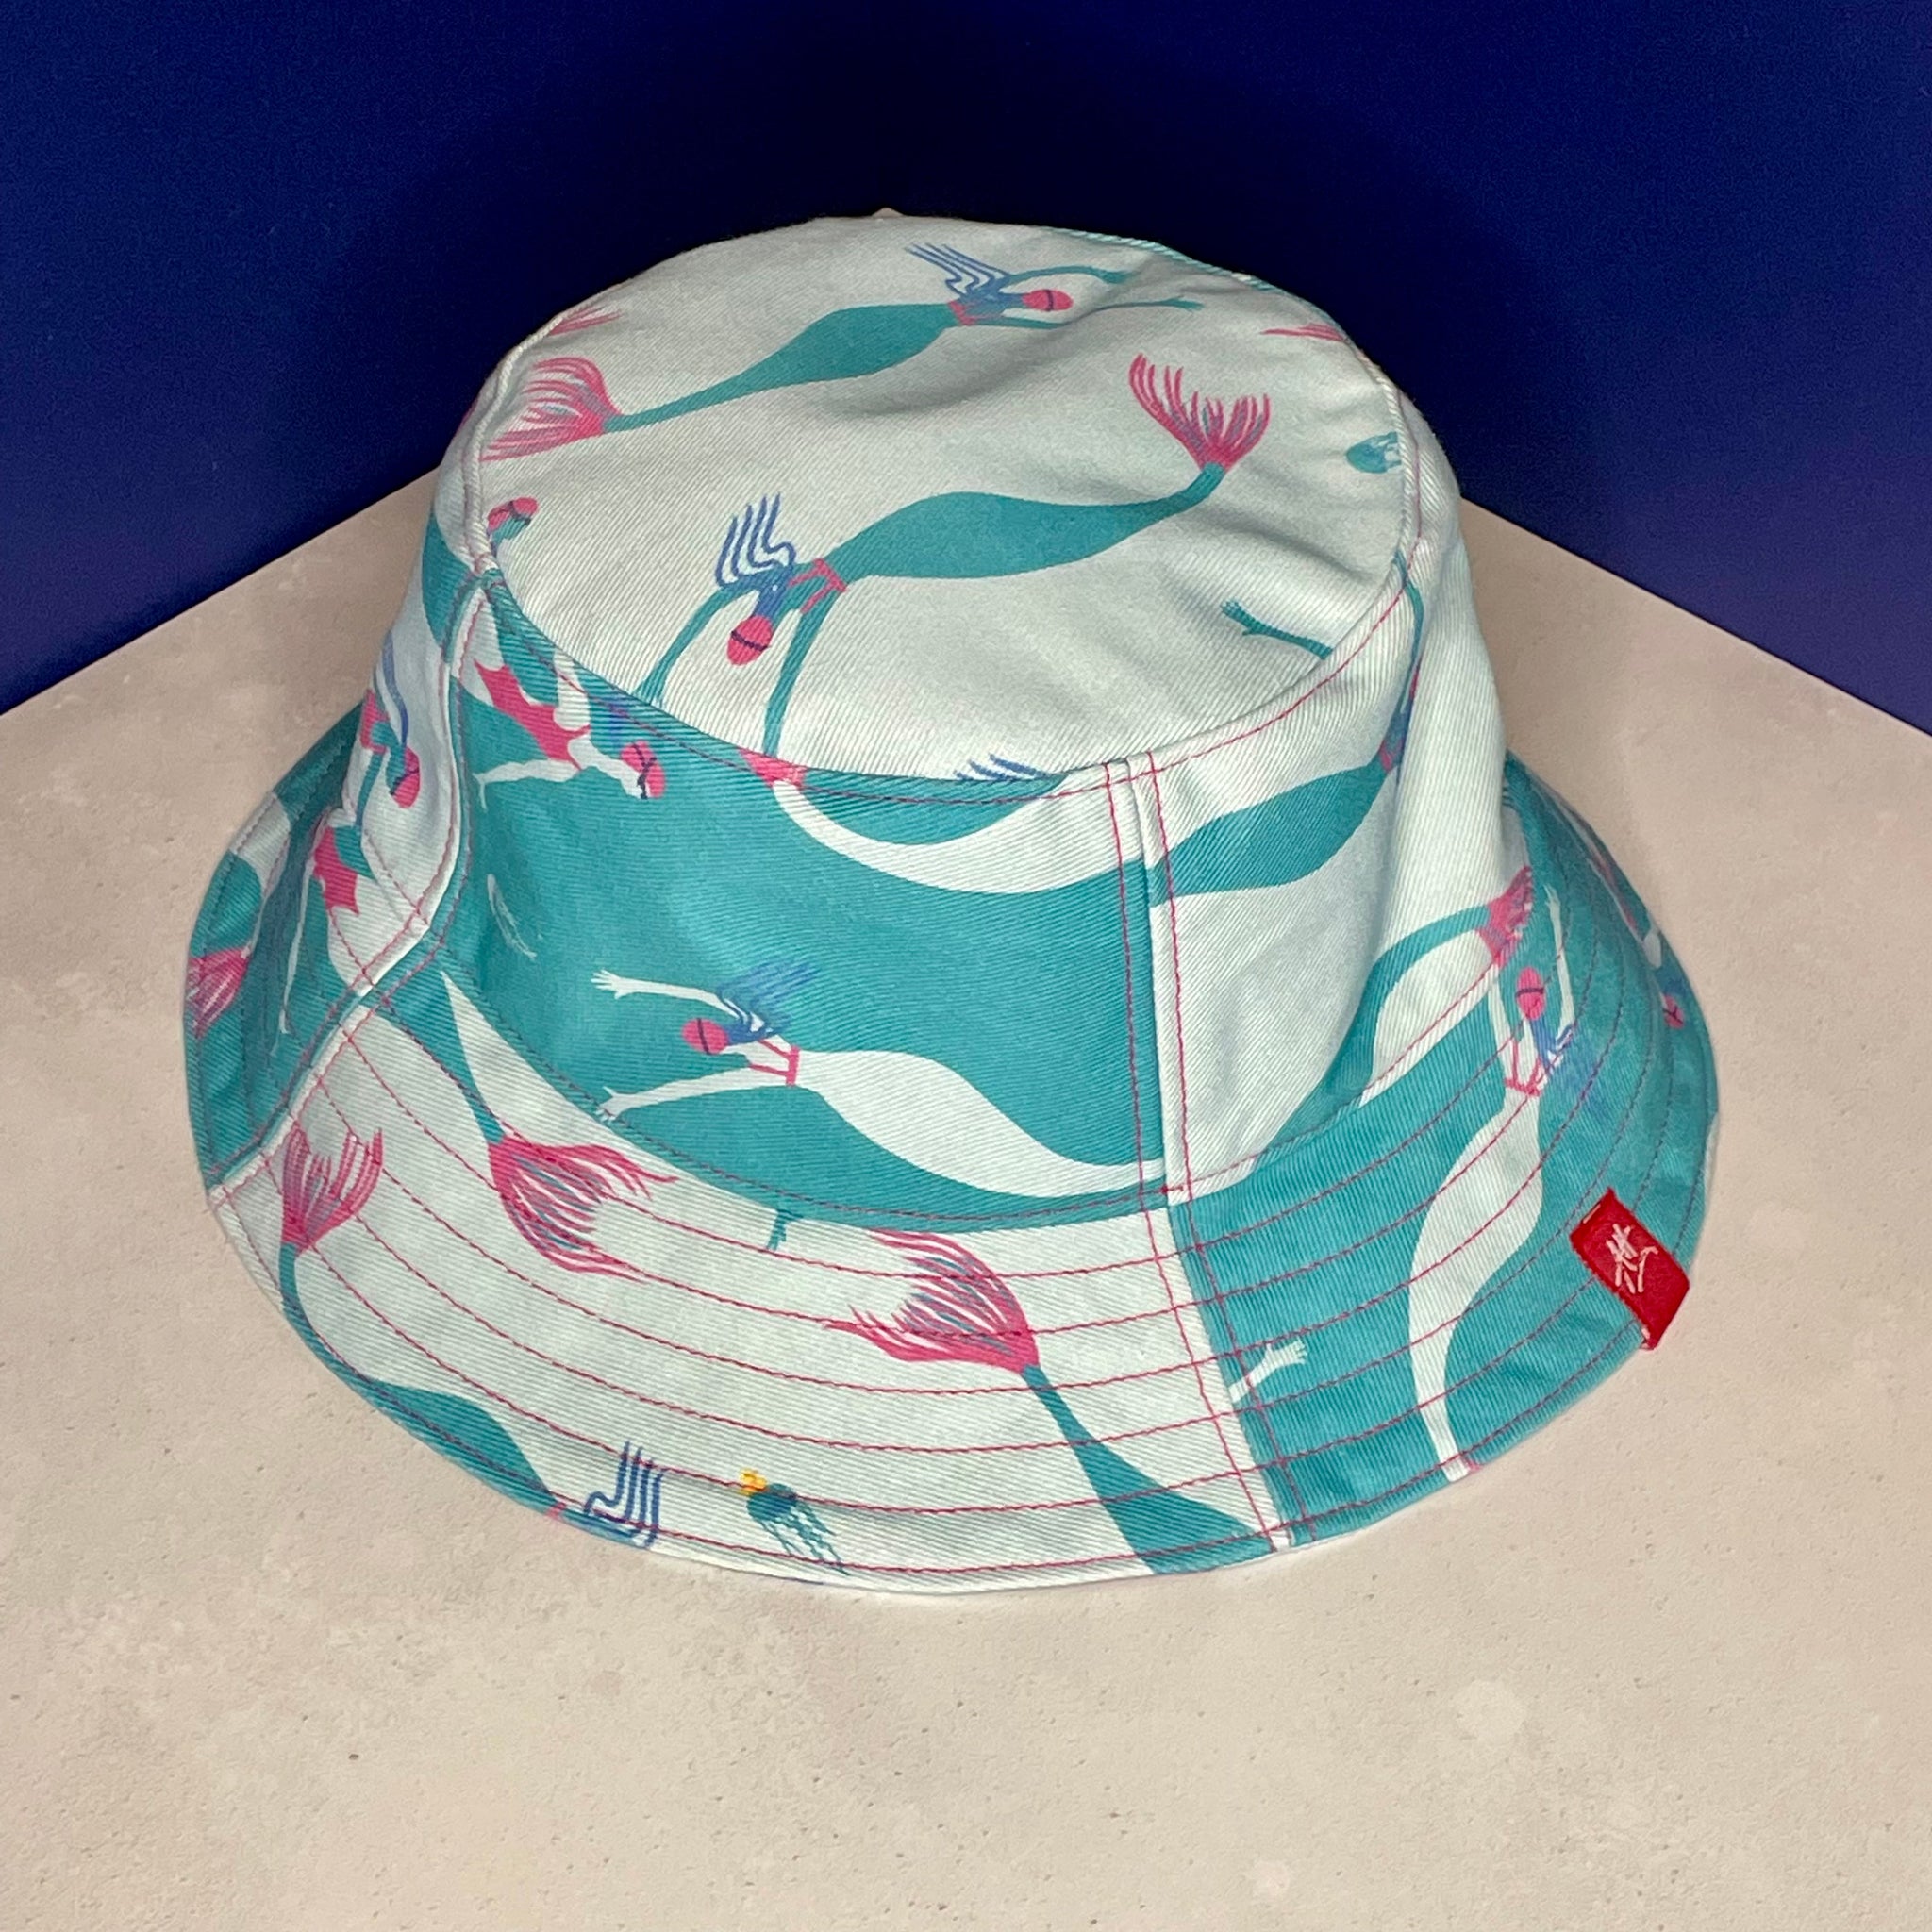 Reversible festival bucket hat. Blue and turquoise Swimming Mermaid design